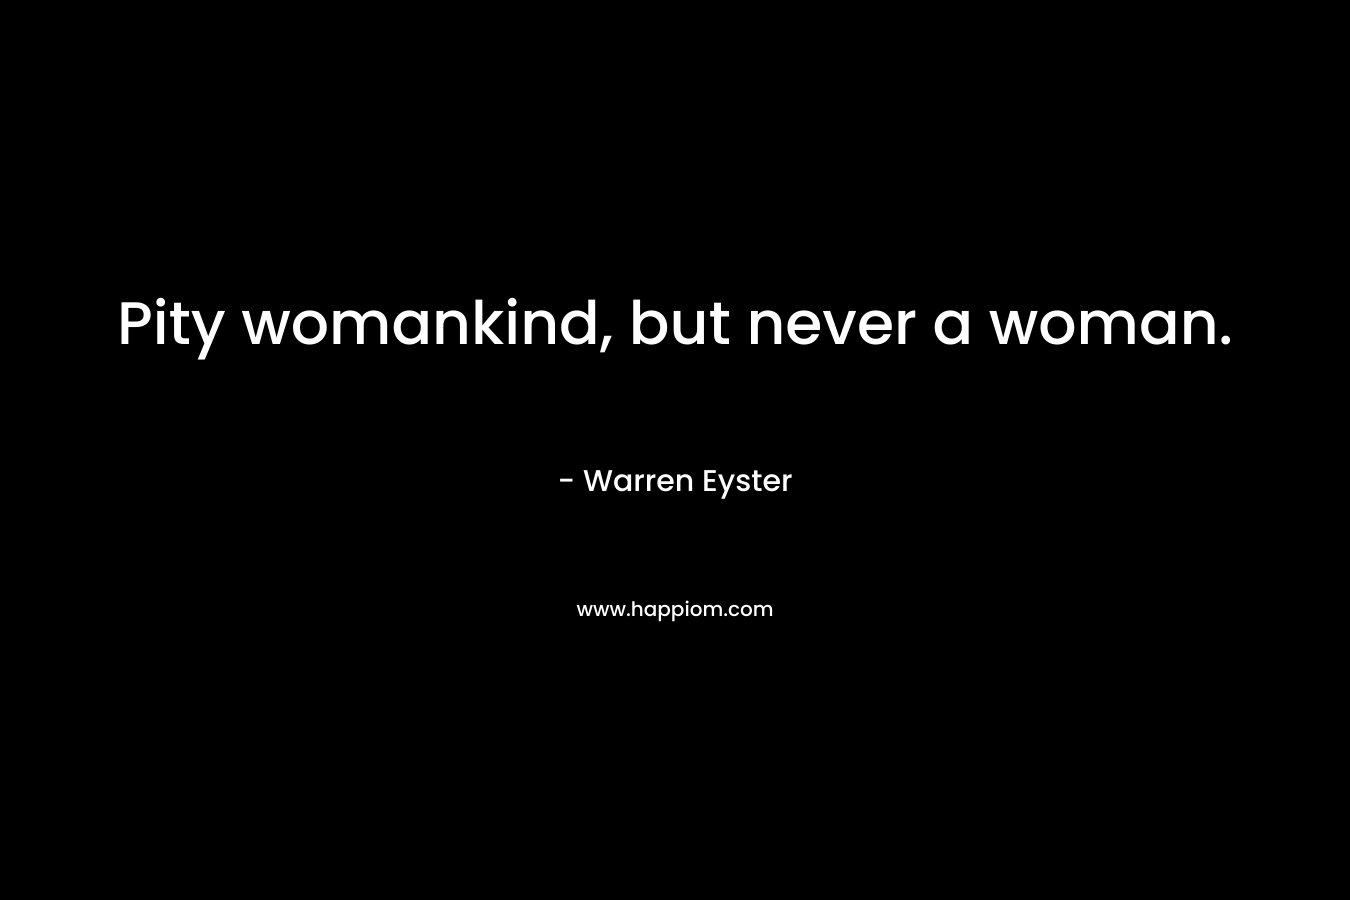 Pity womankind, but never a woman. – Warren Eyster